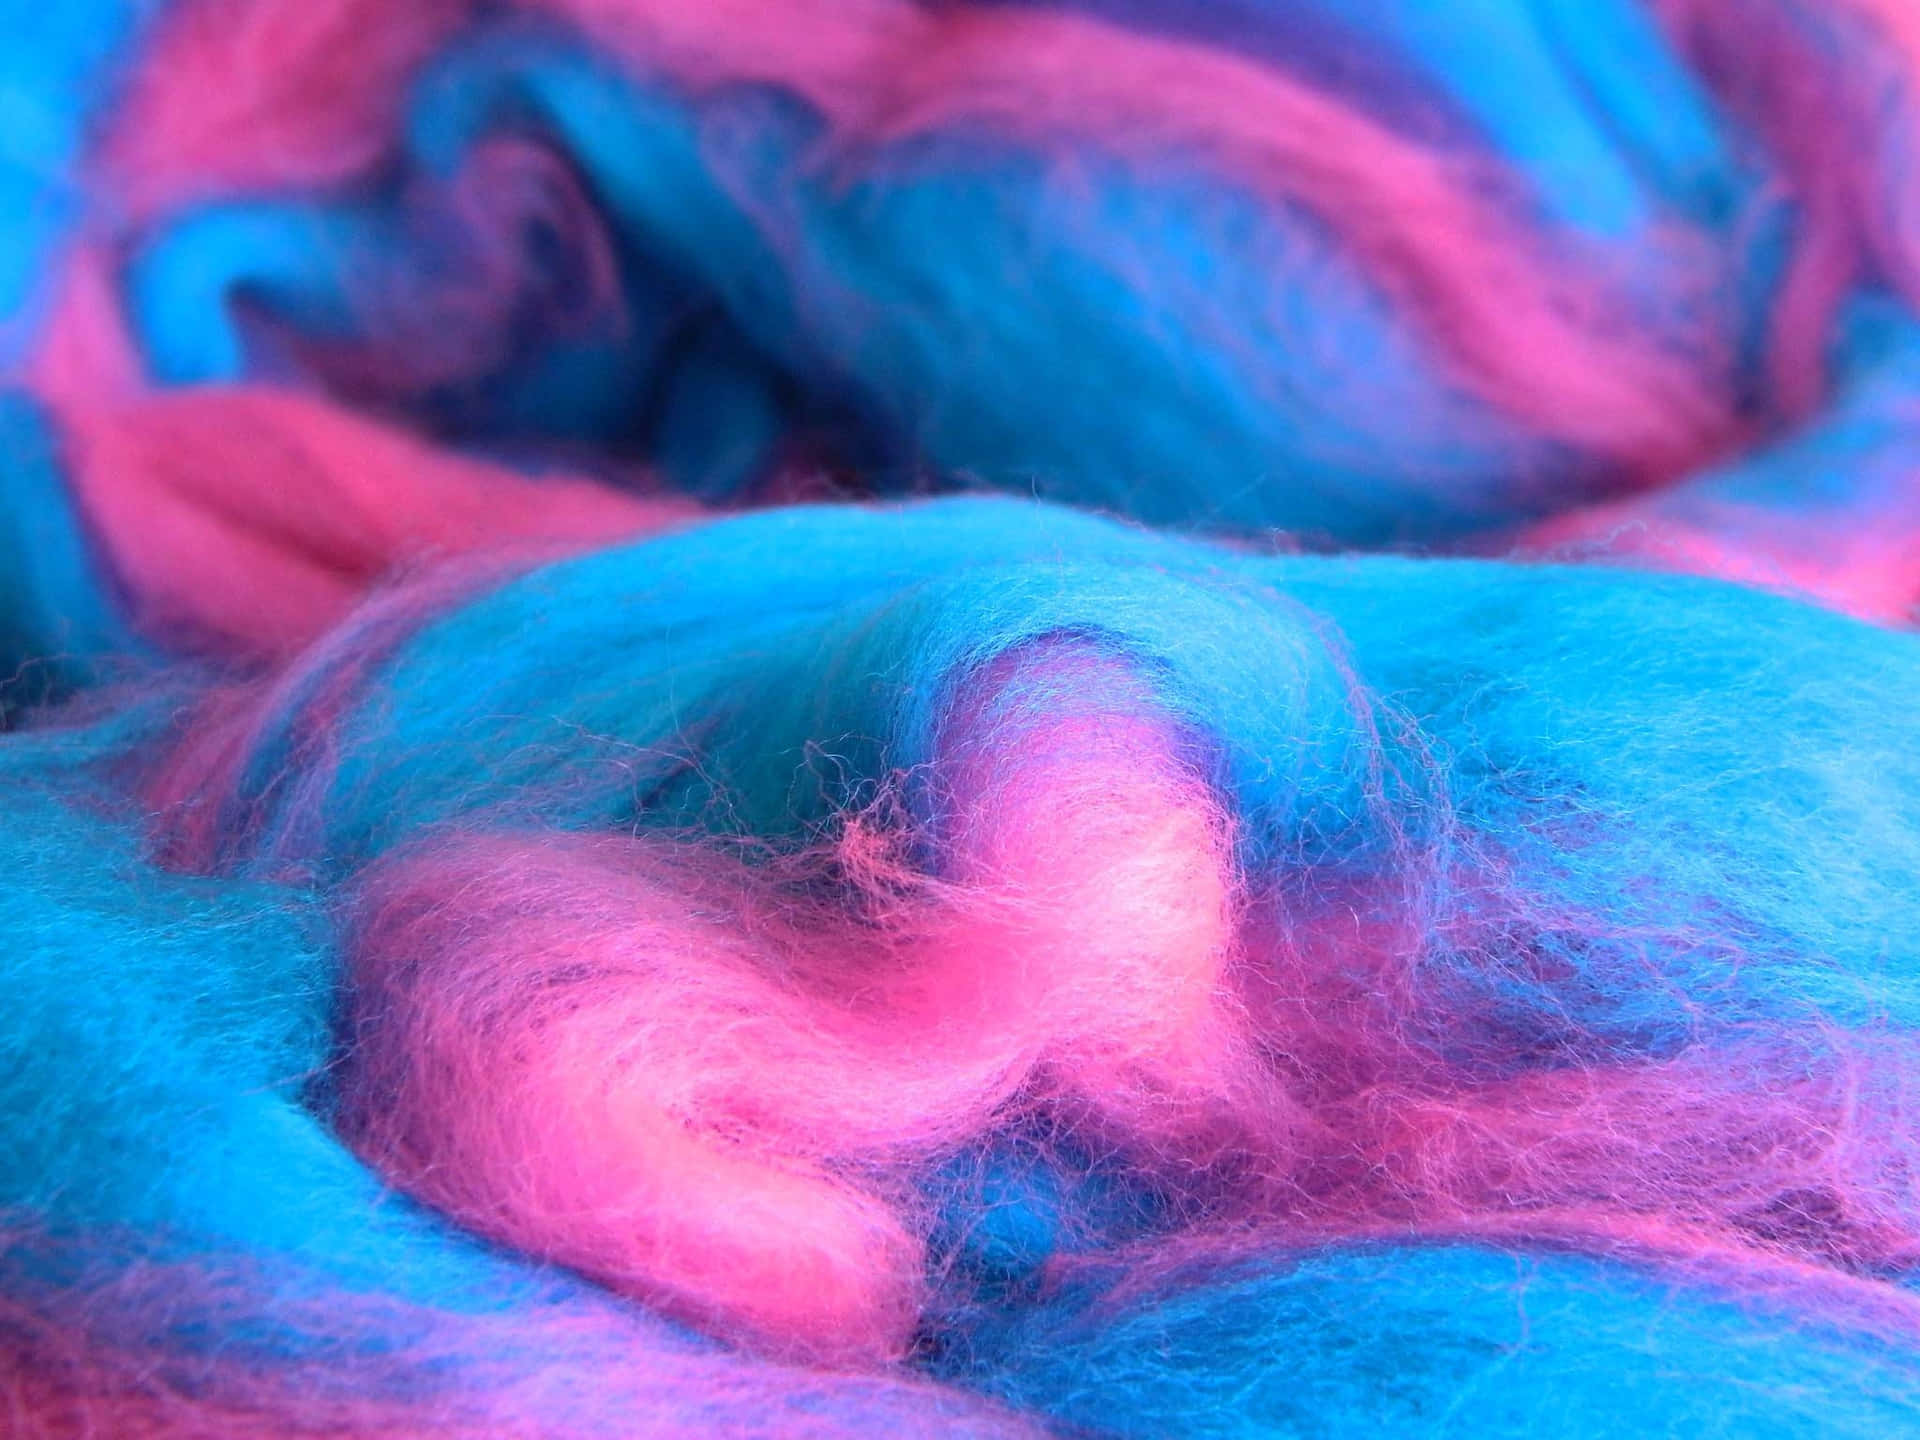 Enjoy the sweet treat of a fluffy, pink cotton candy swirl. Wallpaper